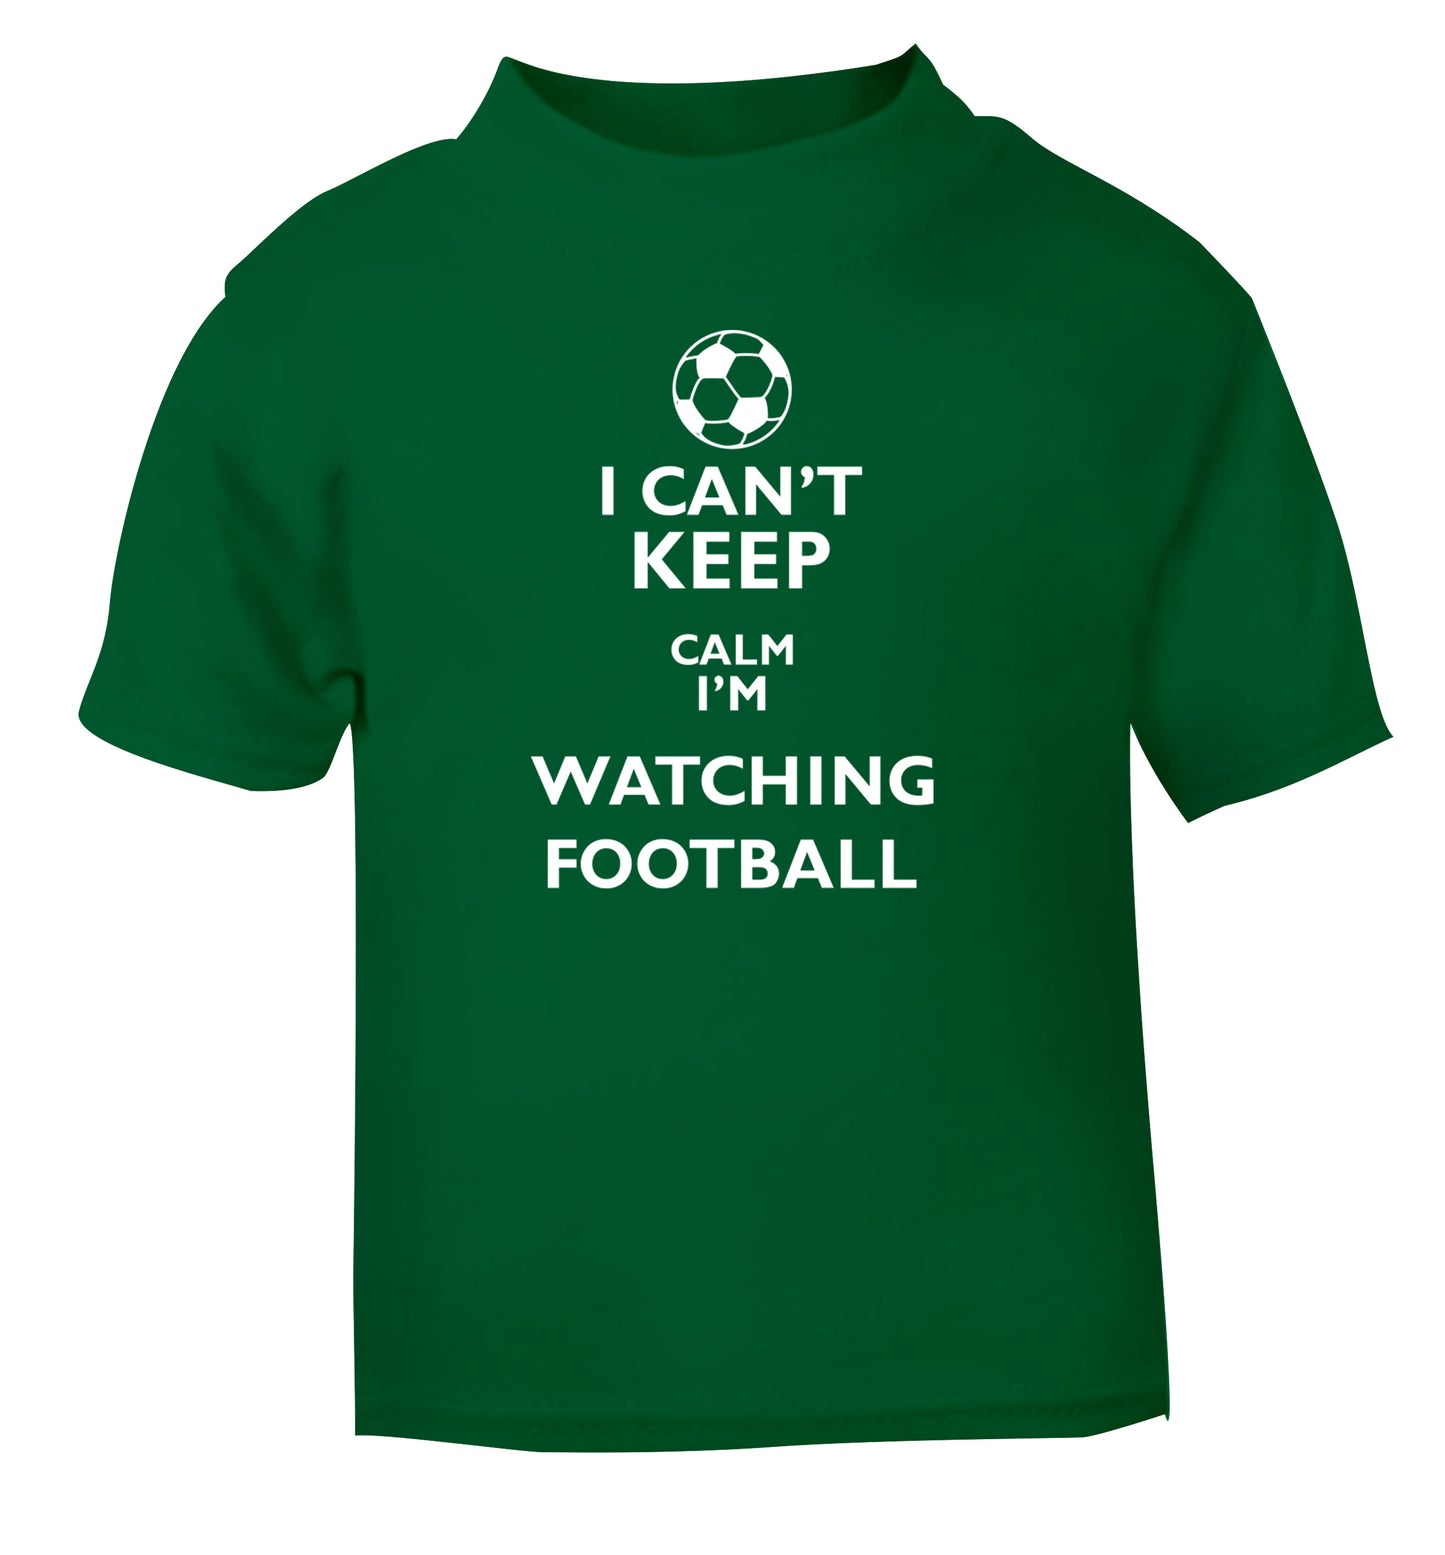 I can't keep calm I'm watching the football green Baby Toddler Tshirt 2 Years